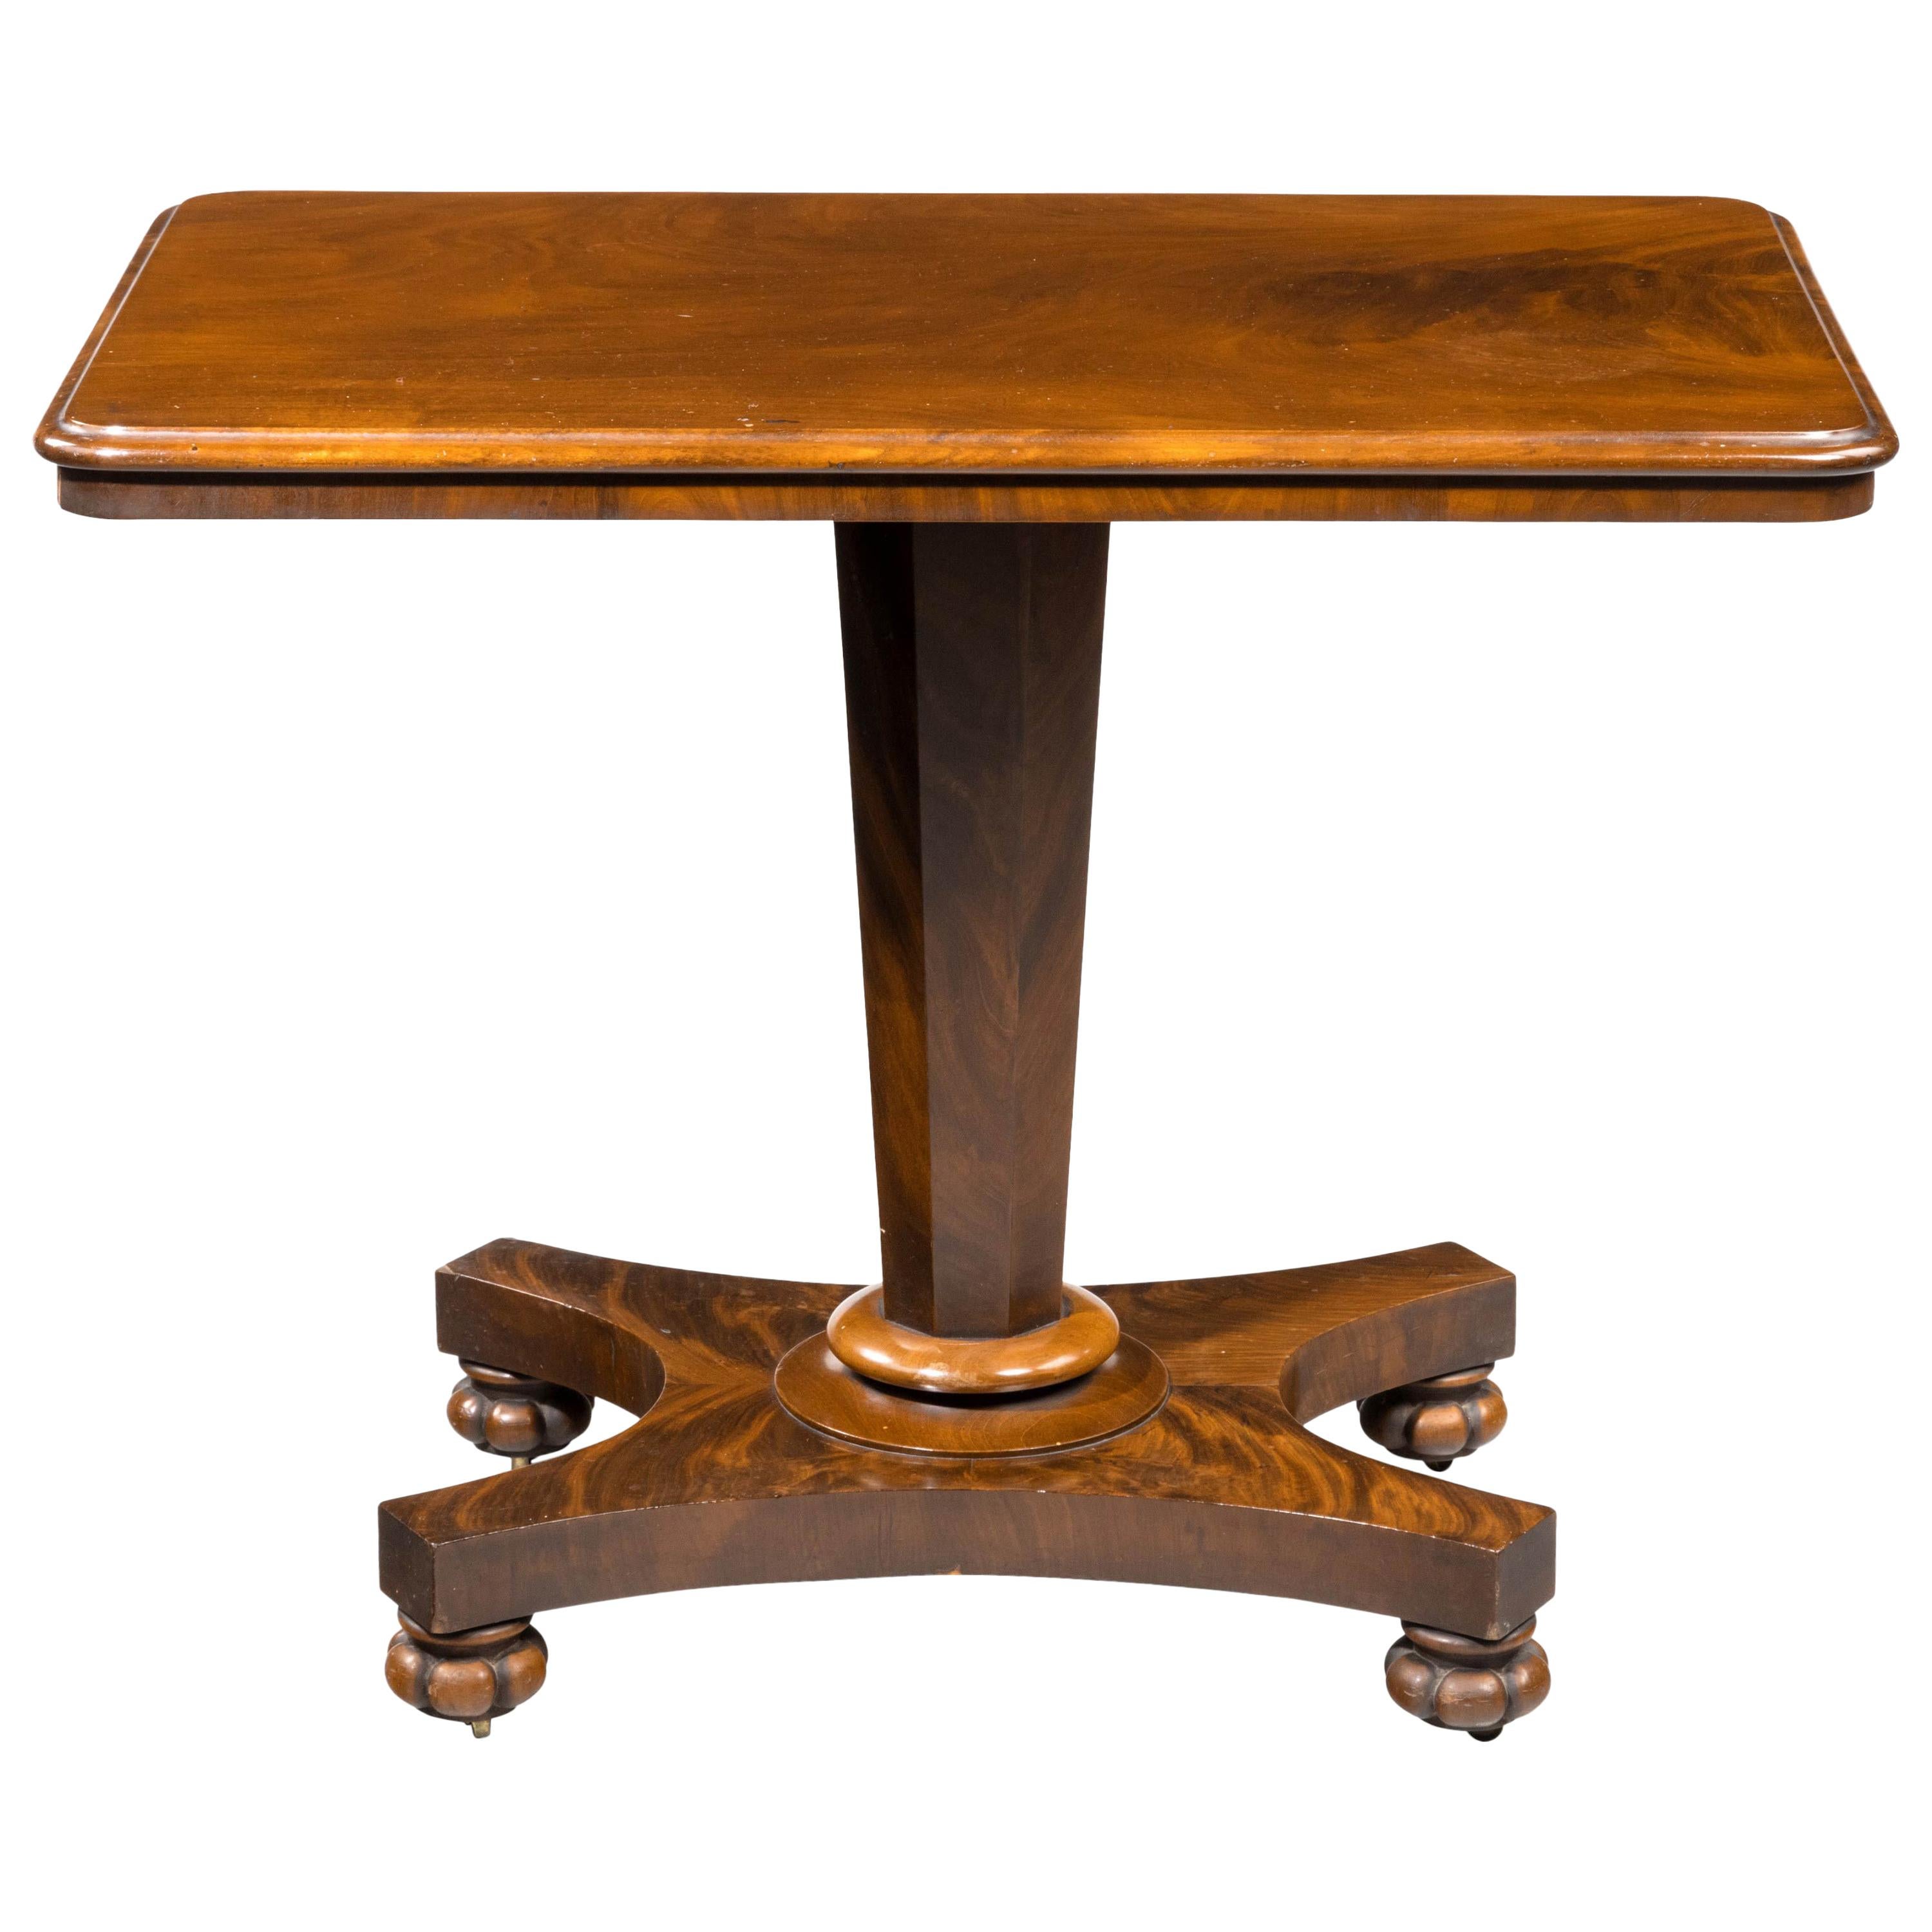 Late Regency Period Centre Standing Occasional Table